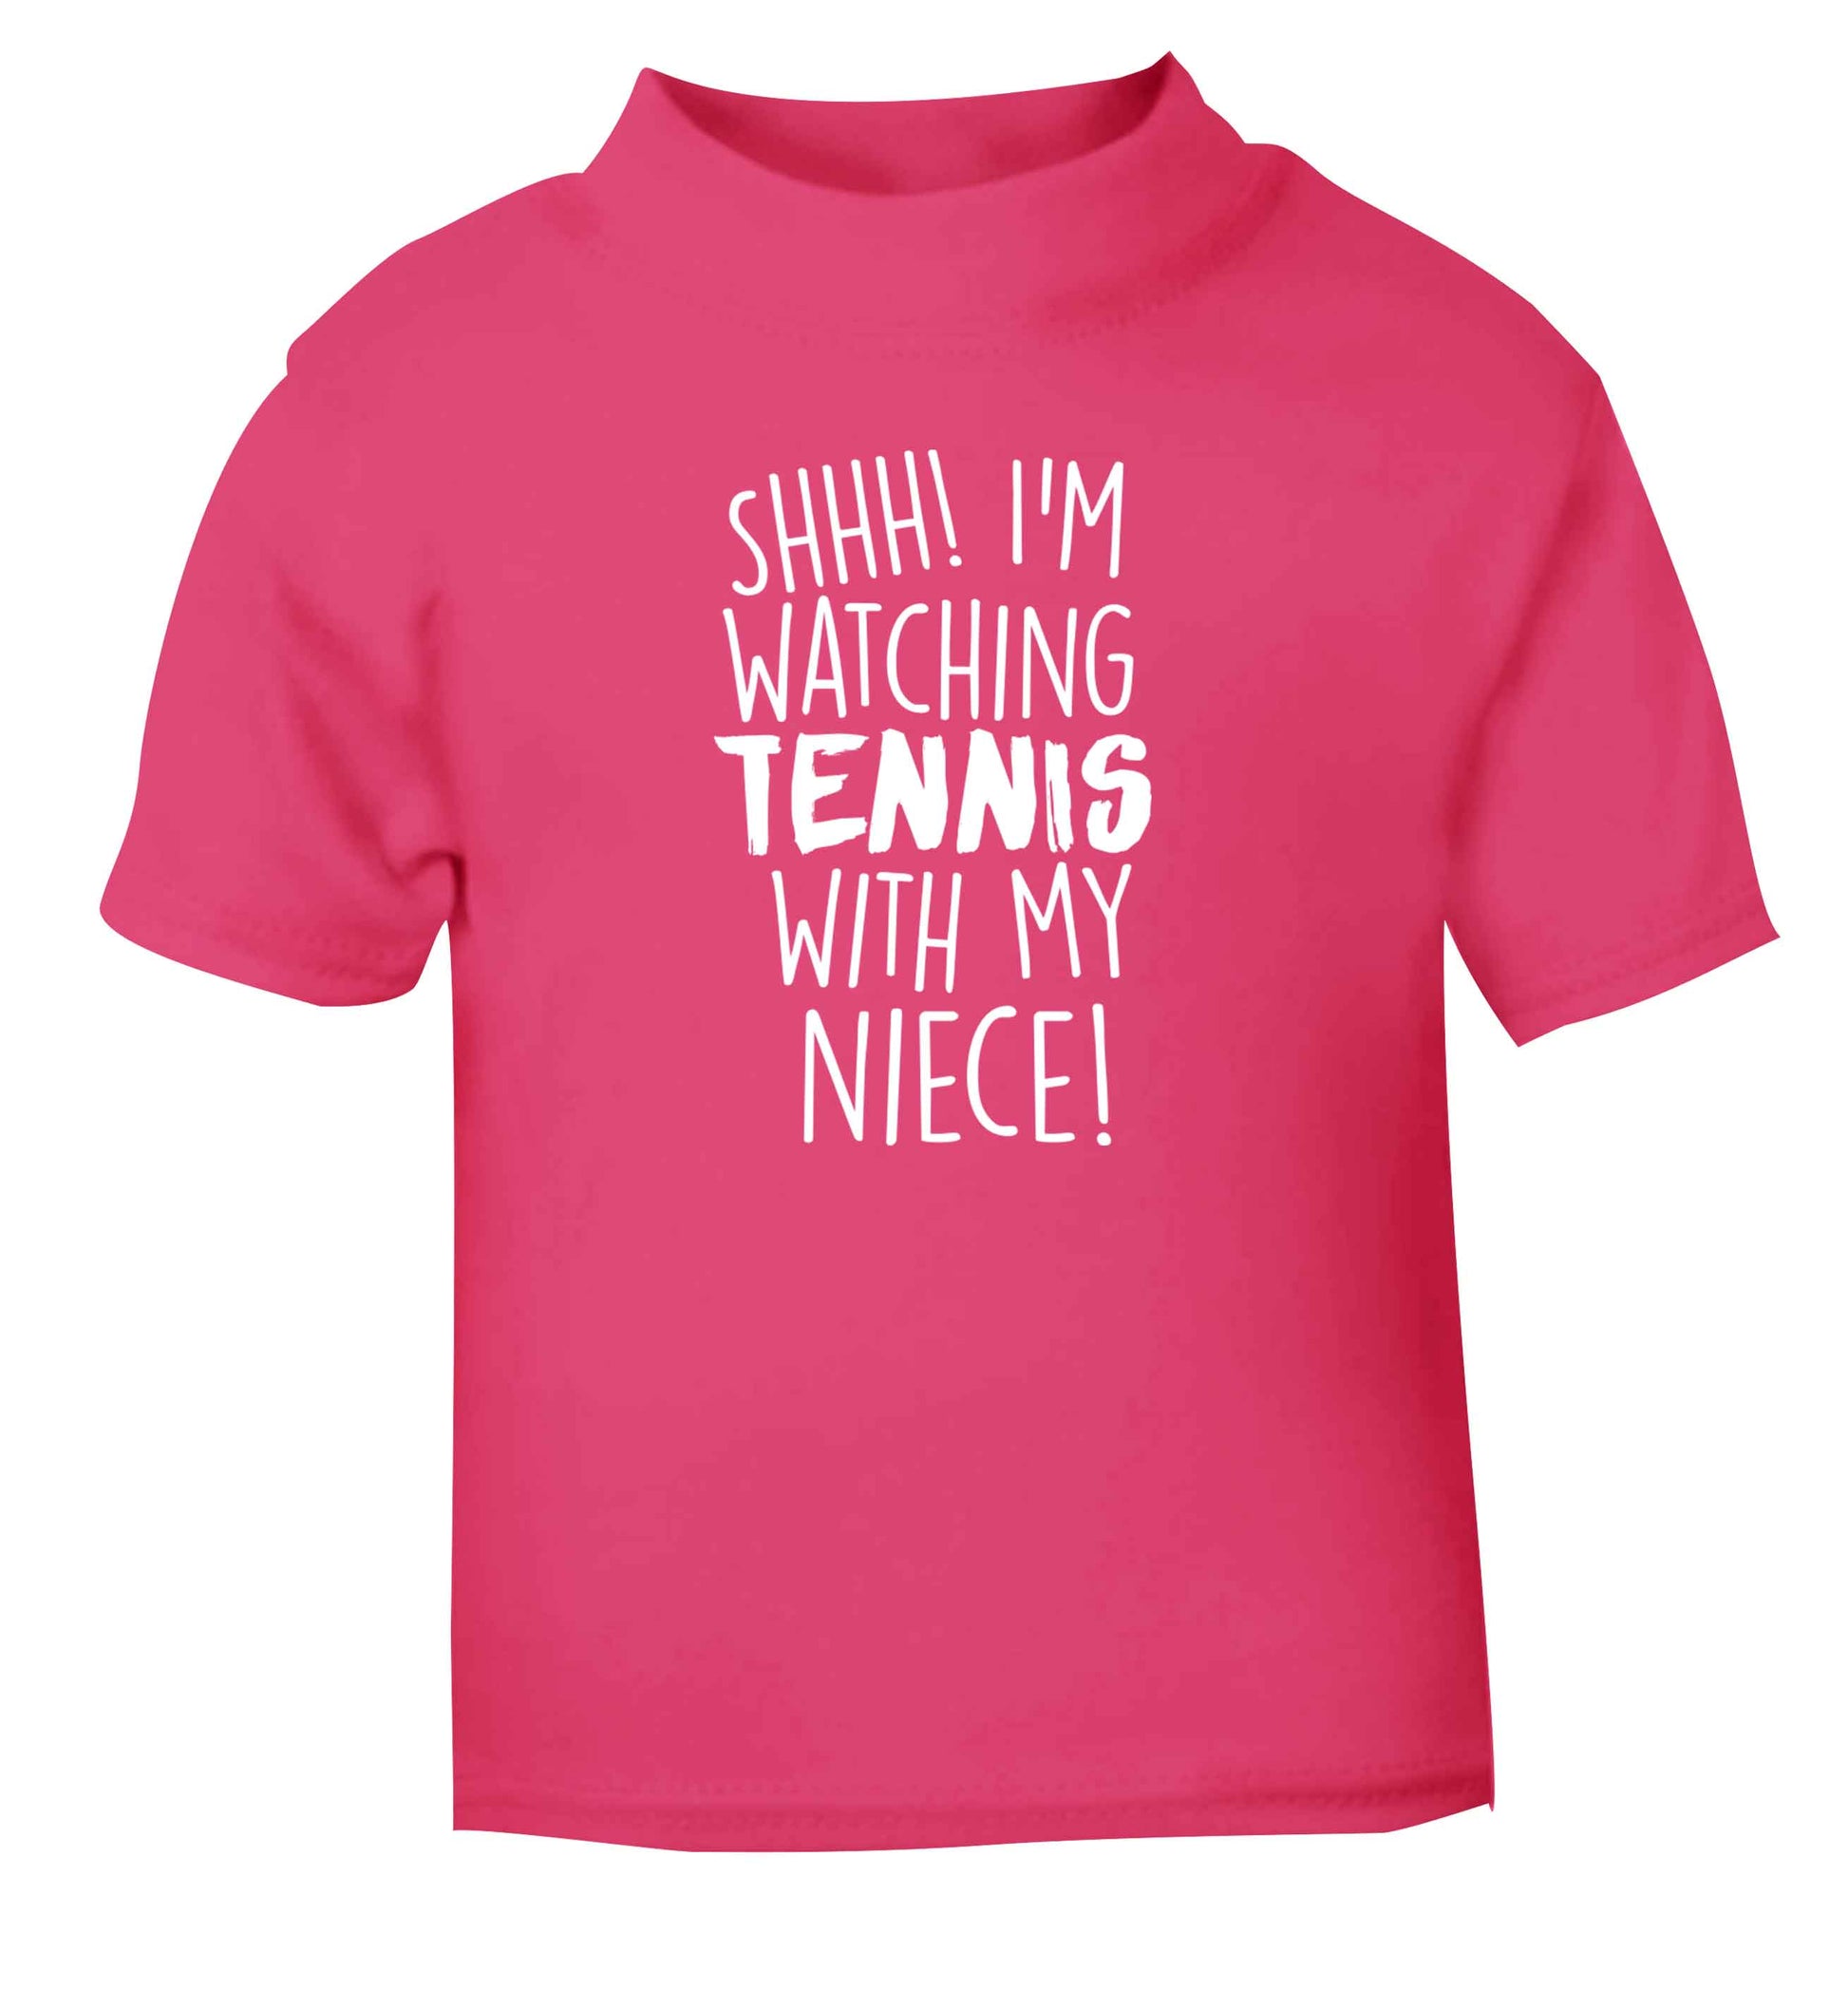 Shh! I'm watching tennis with my niece! pink Baby Toddler Tshirt 2 Years